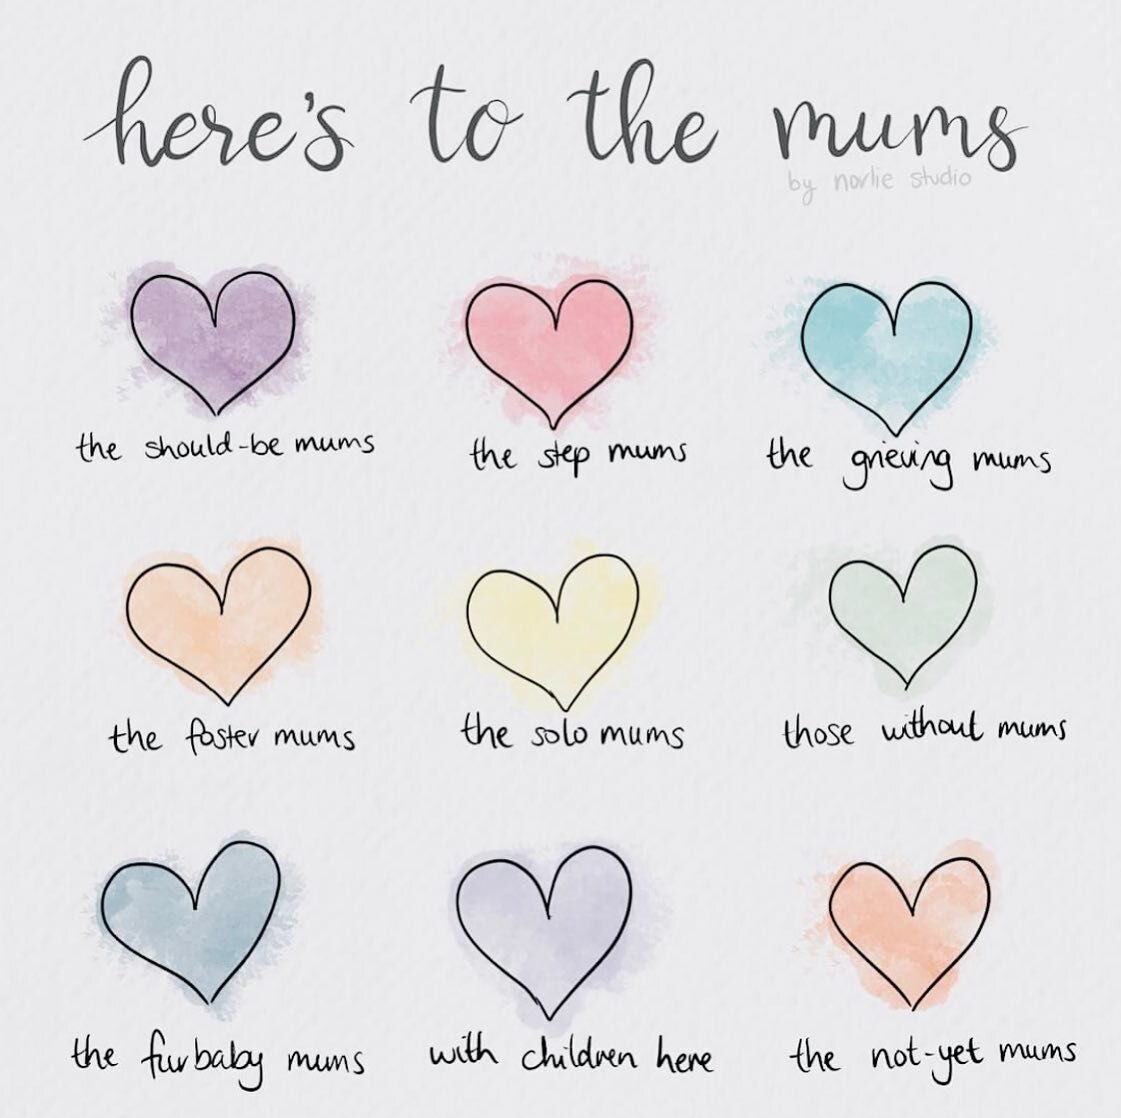 I know I&rsquo;m incredibly lucky to be able to celebrate Mother&rsquo;s Day today, and it&rsquo;s not something I take for granted.

If you&rsquo;ve suffered the loss of an important mum in your life, if you desperately want to be a mum - whether fo